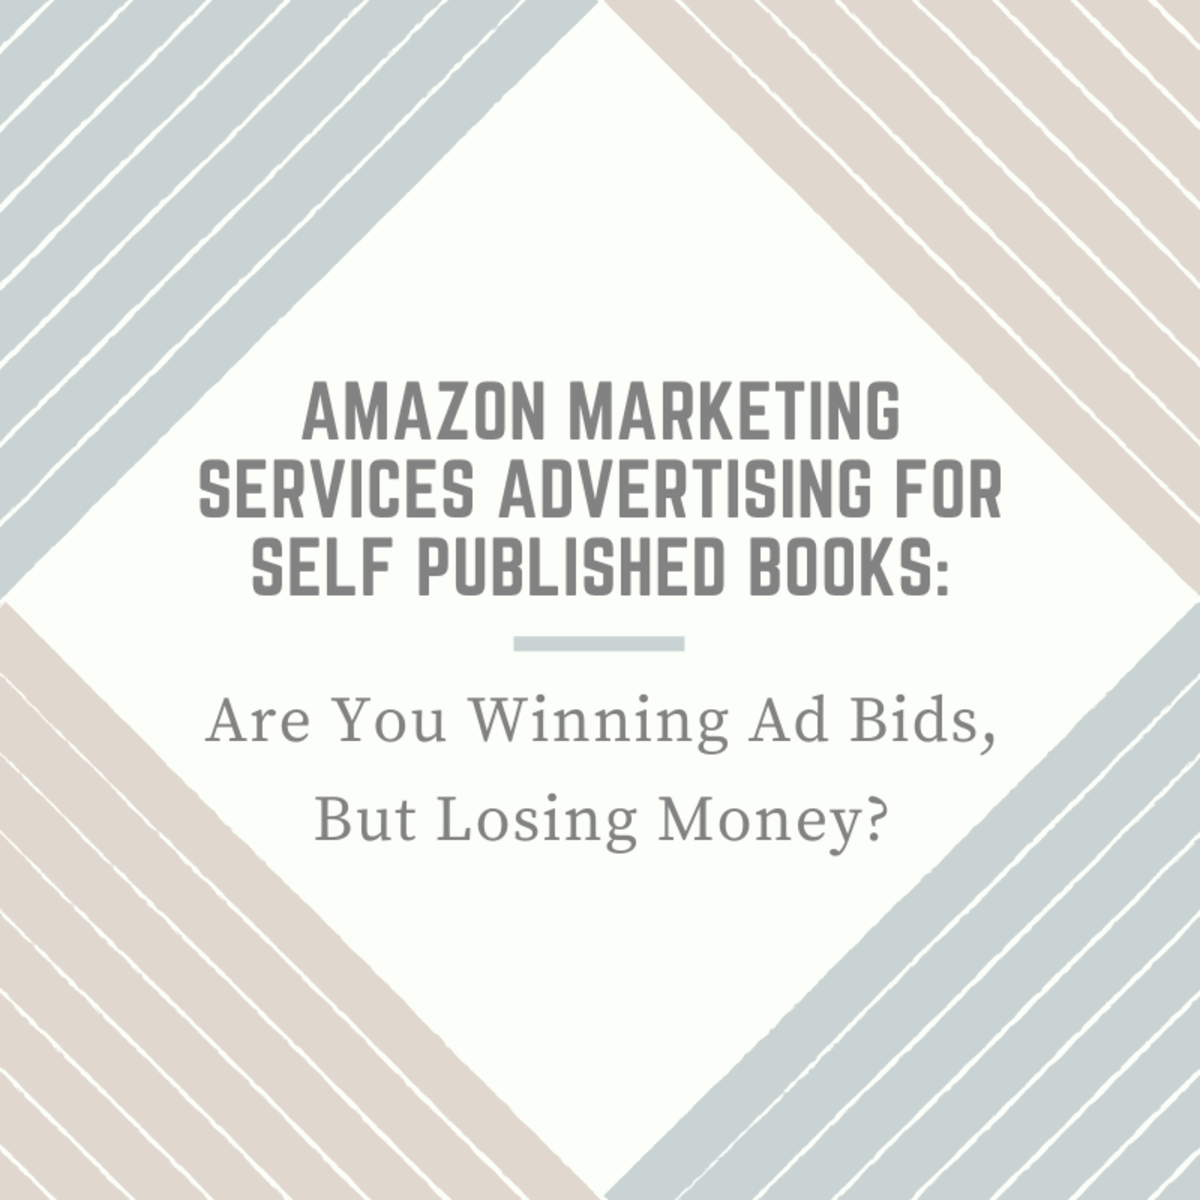 Amazon Marketing Services Advertising for Self-Published Books